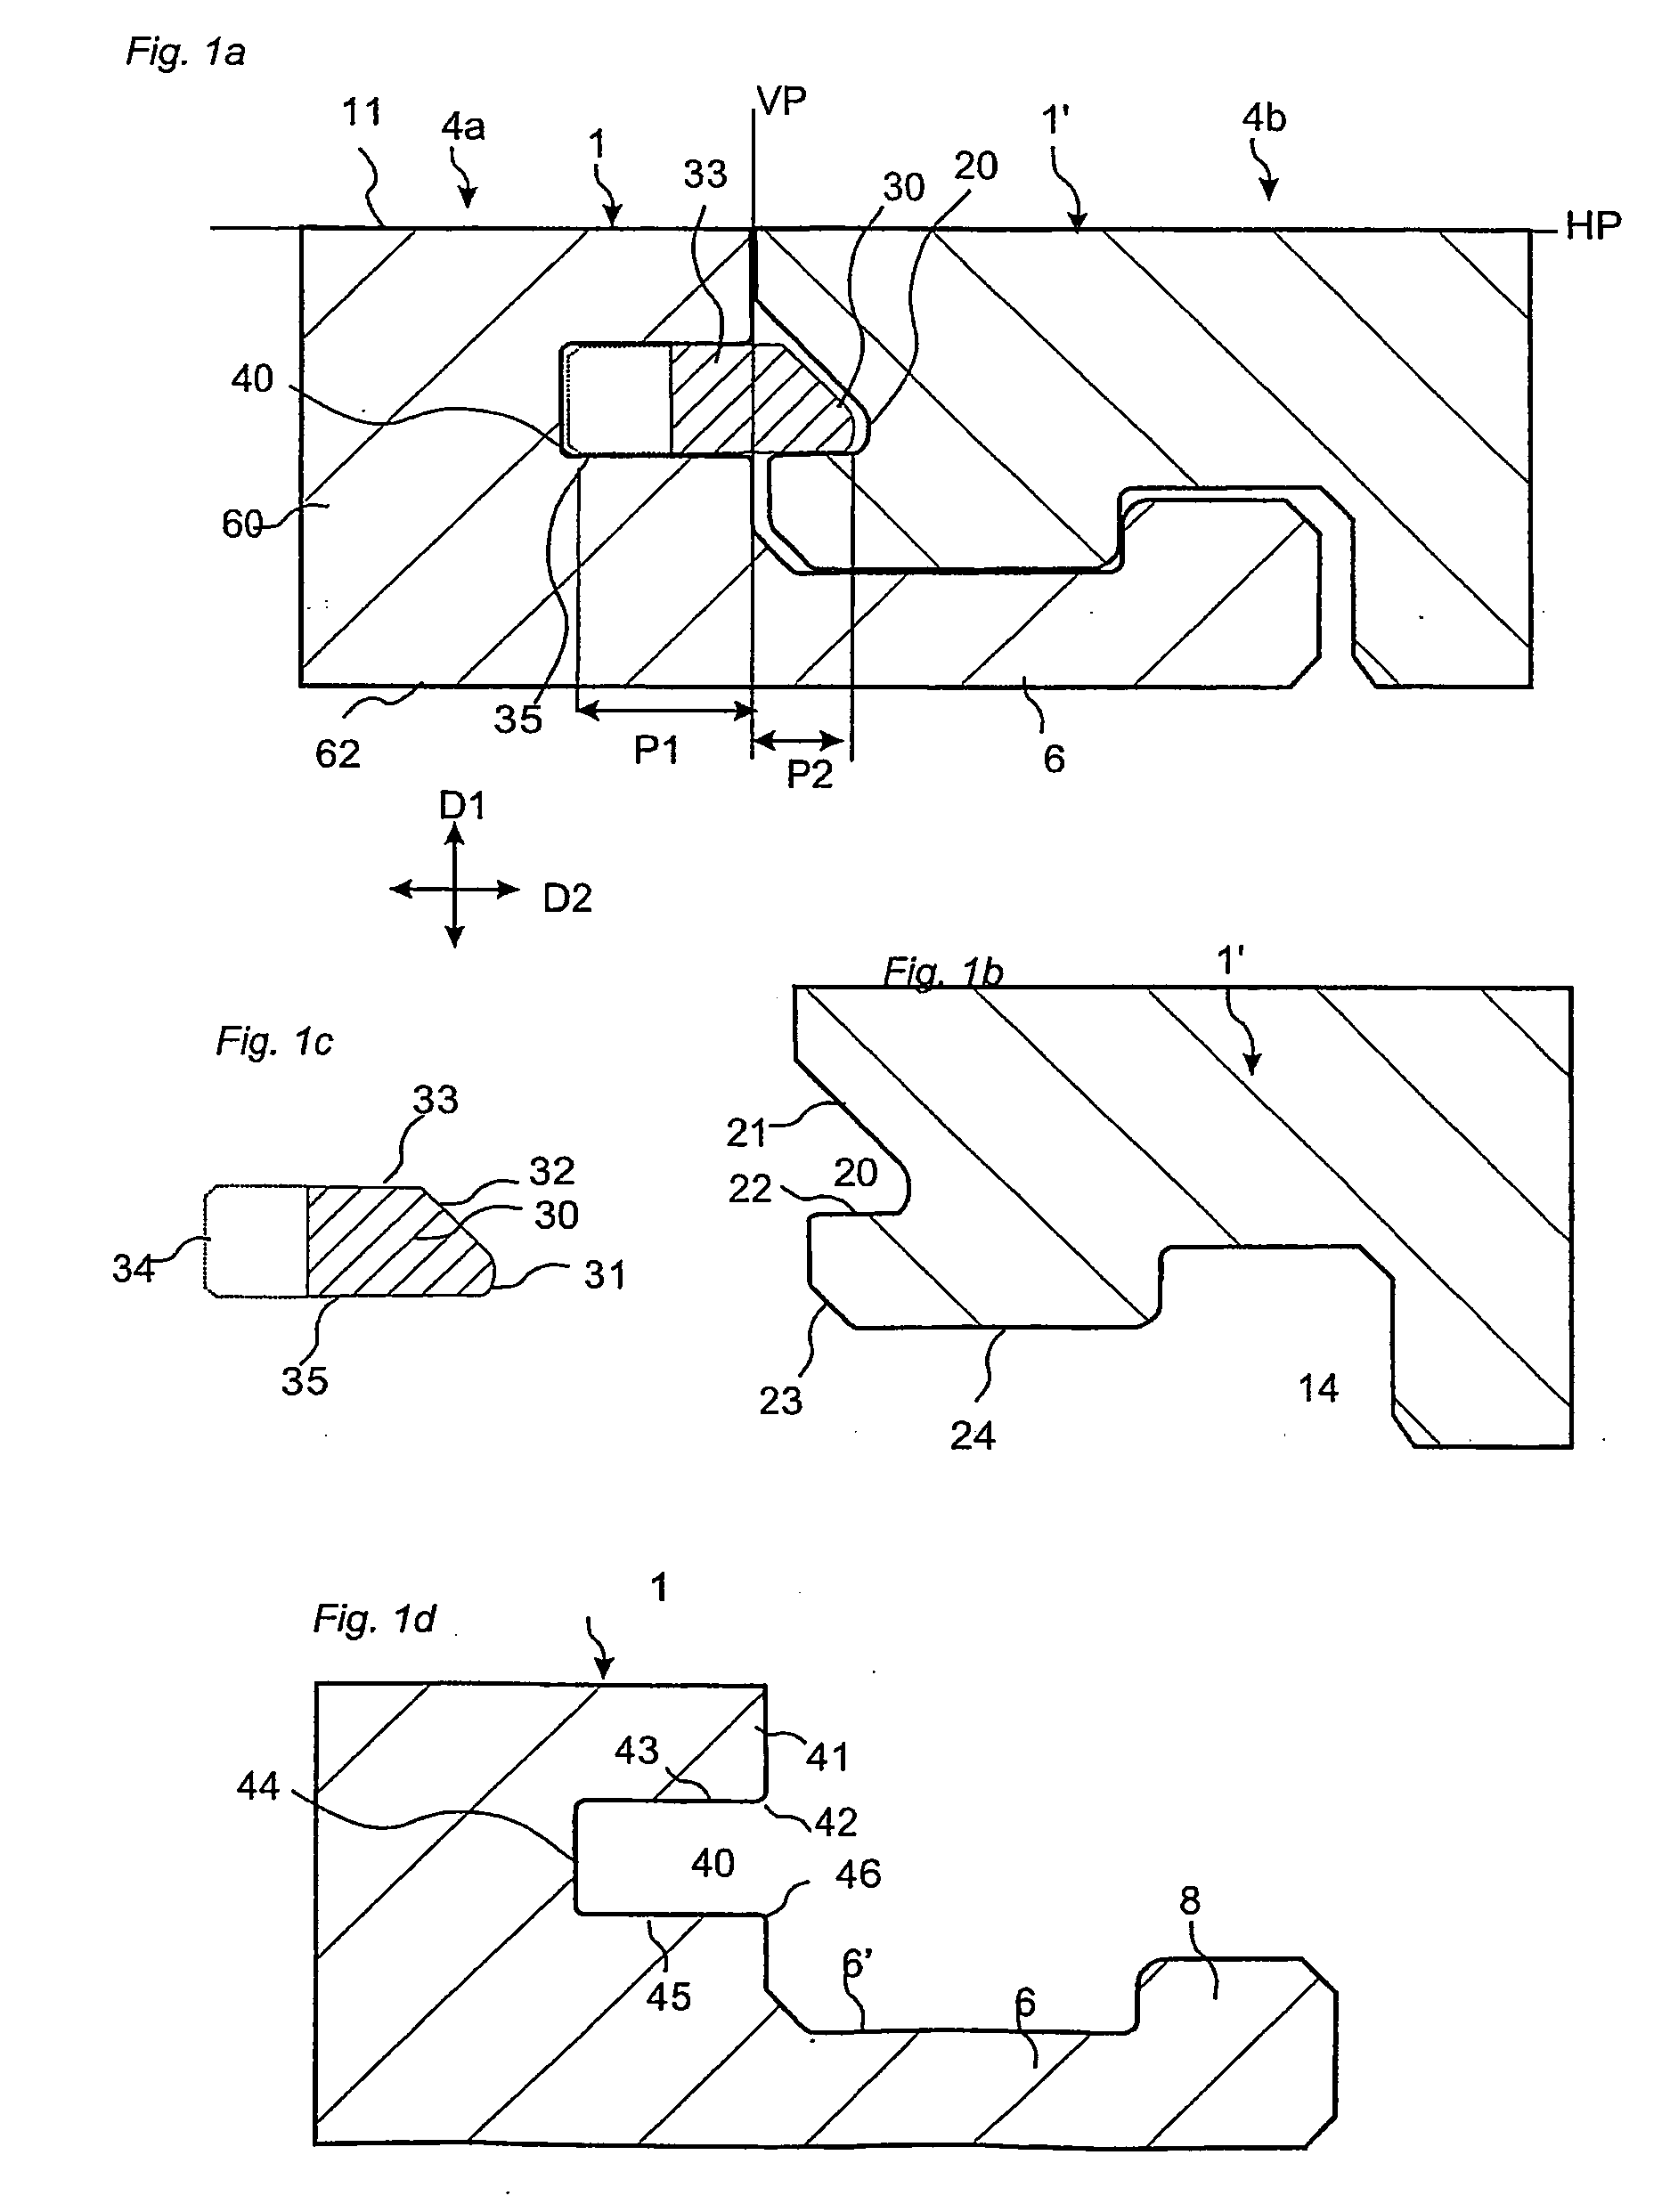 Mechanical locking of floor panels with a flexible tongue